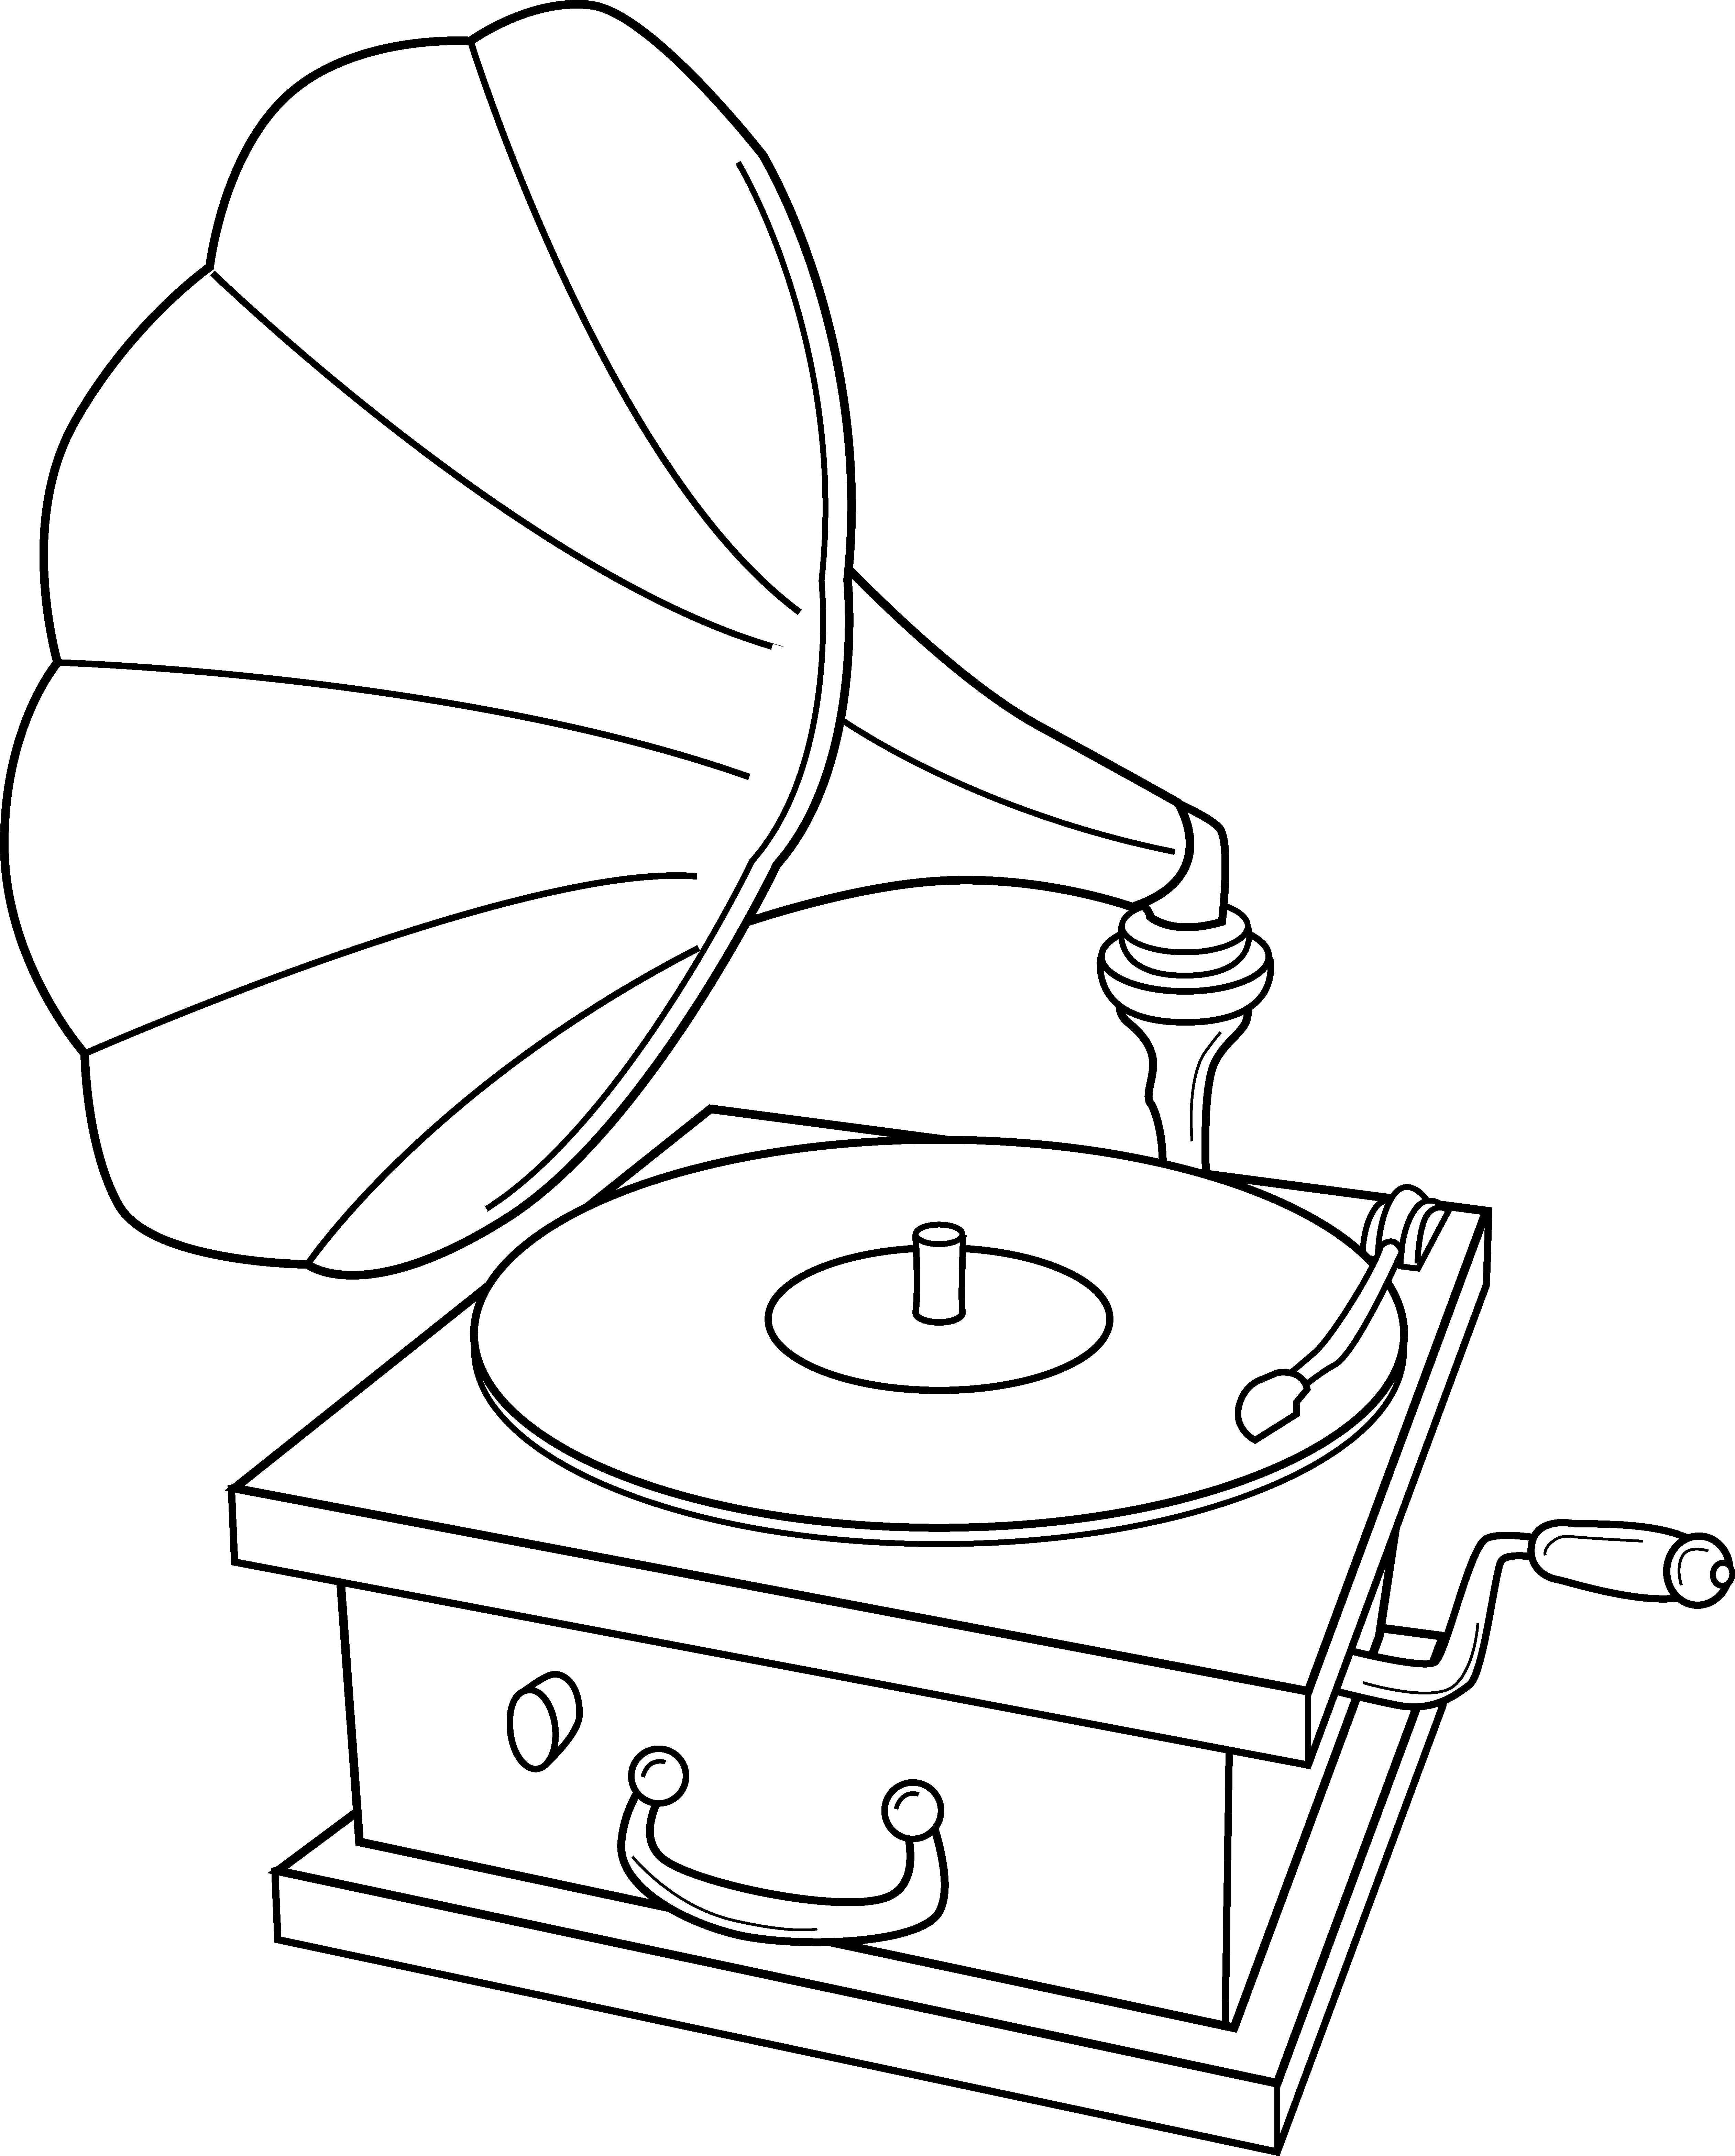 Xylophone clipart draw. Old record player drawing